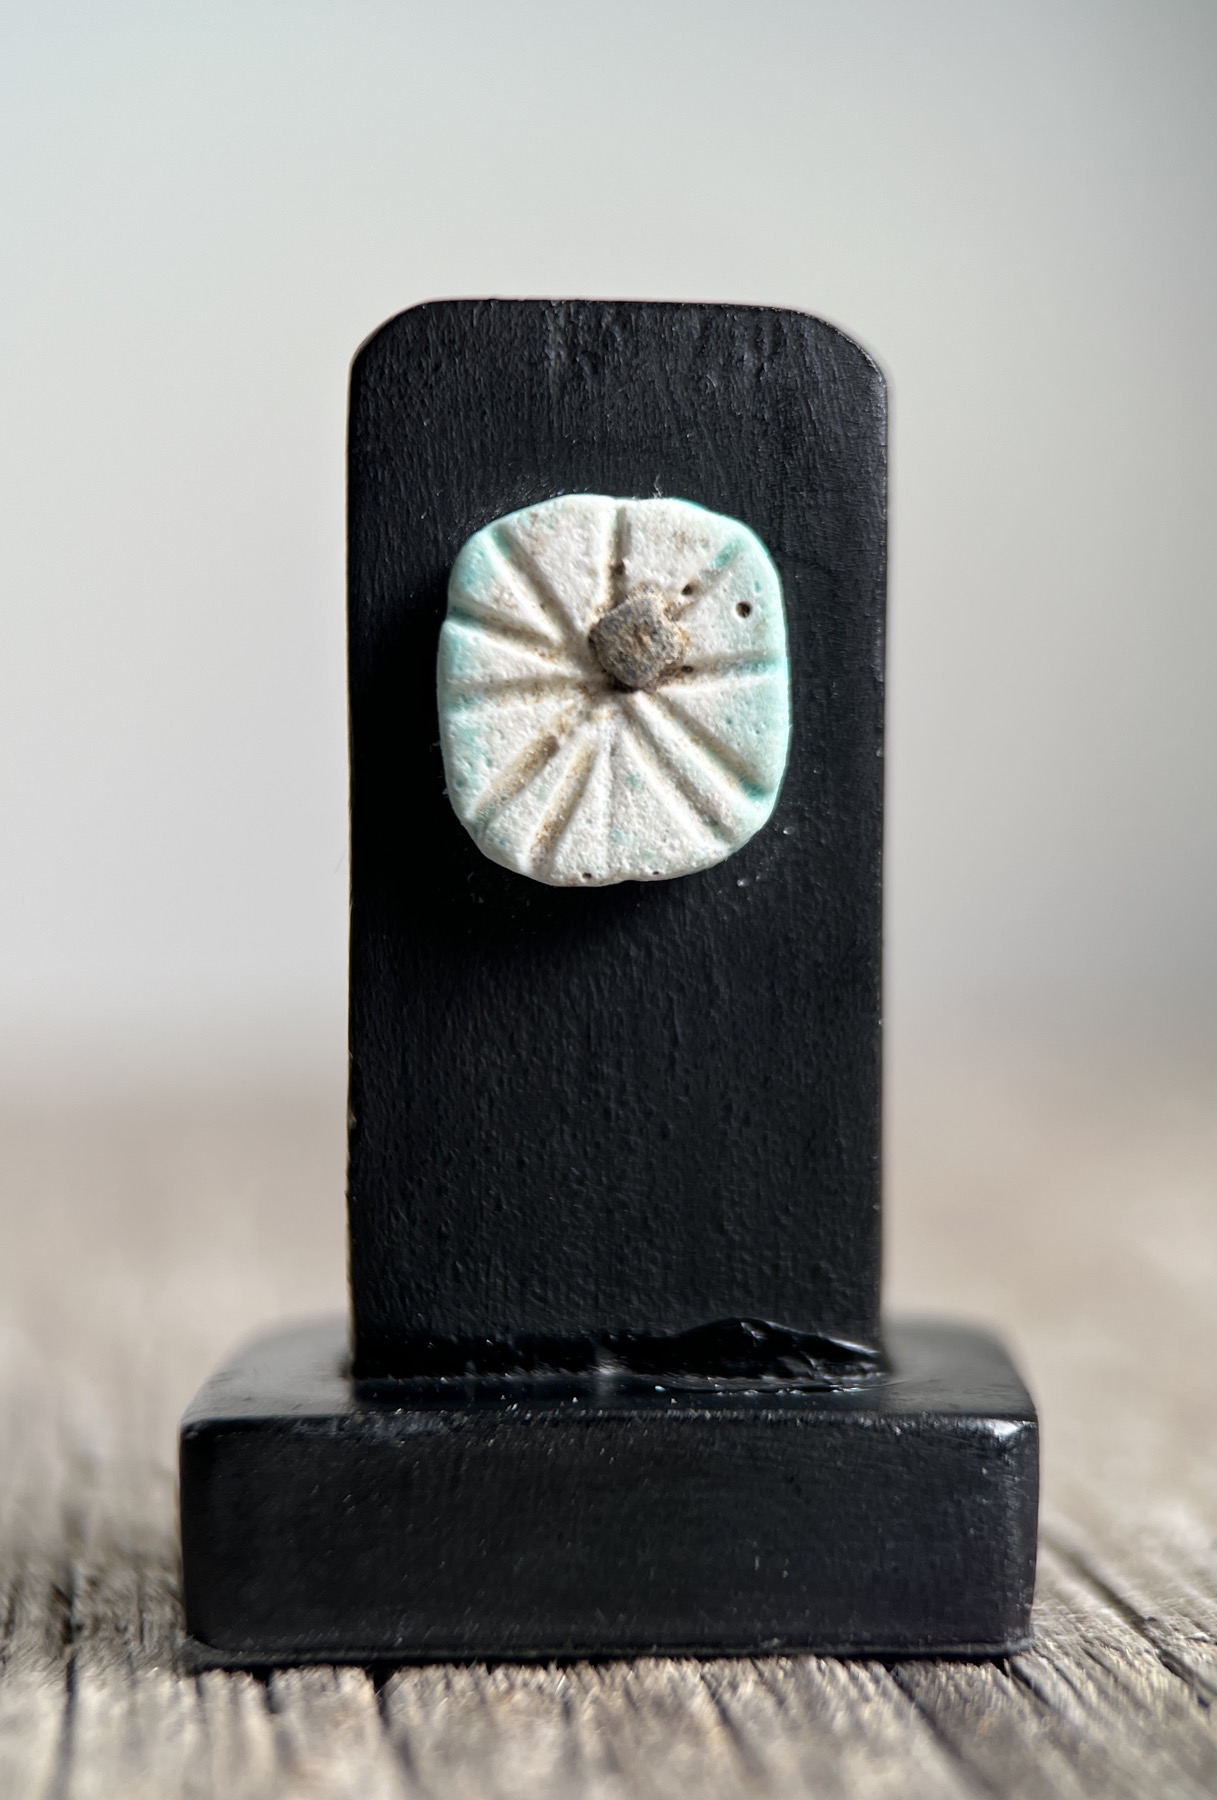 Ancient Egyptian faience amulet bead, Eye or Star, 700-300 BC